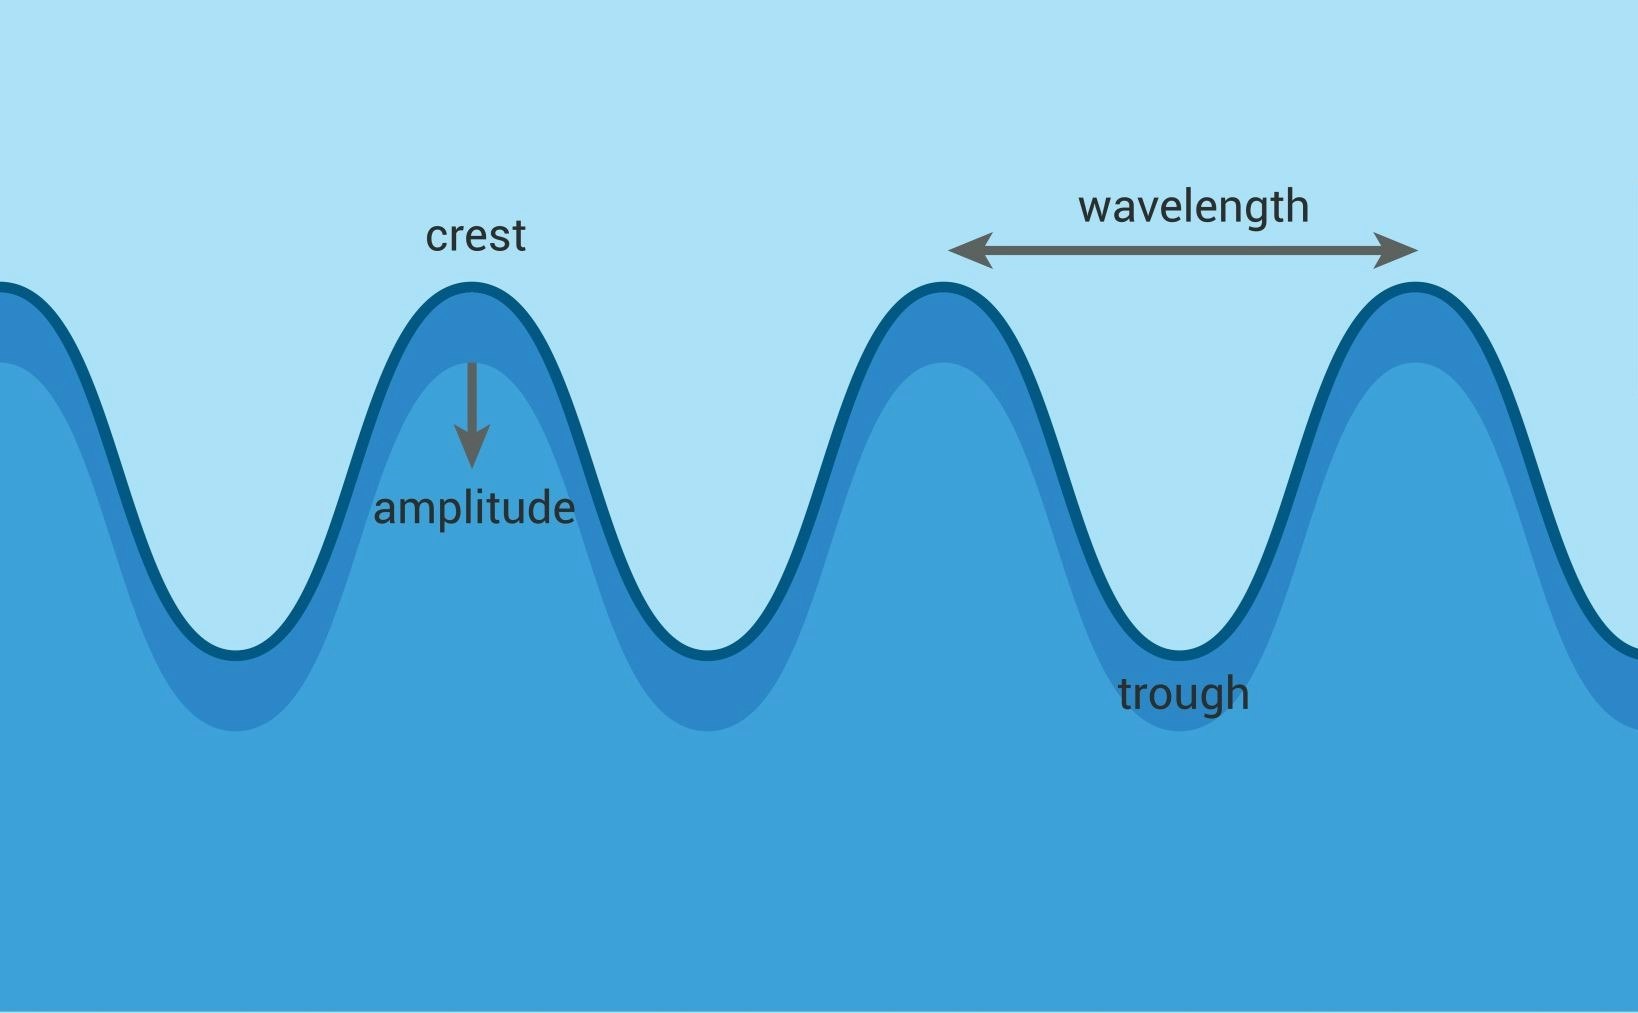 The anatomy of the ocean wave